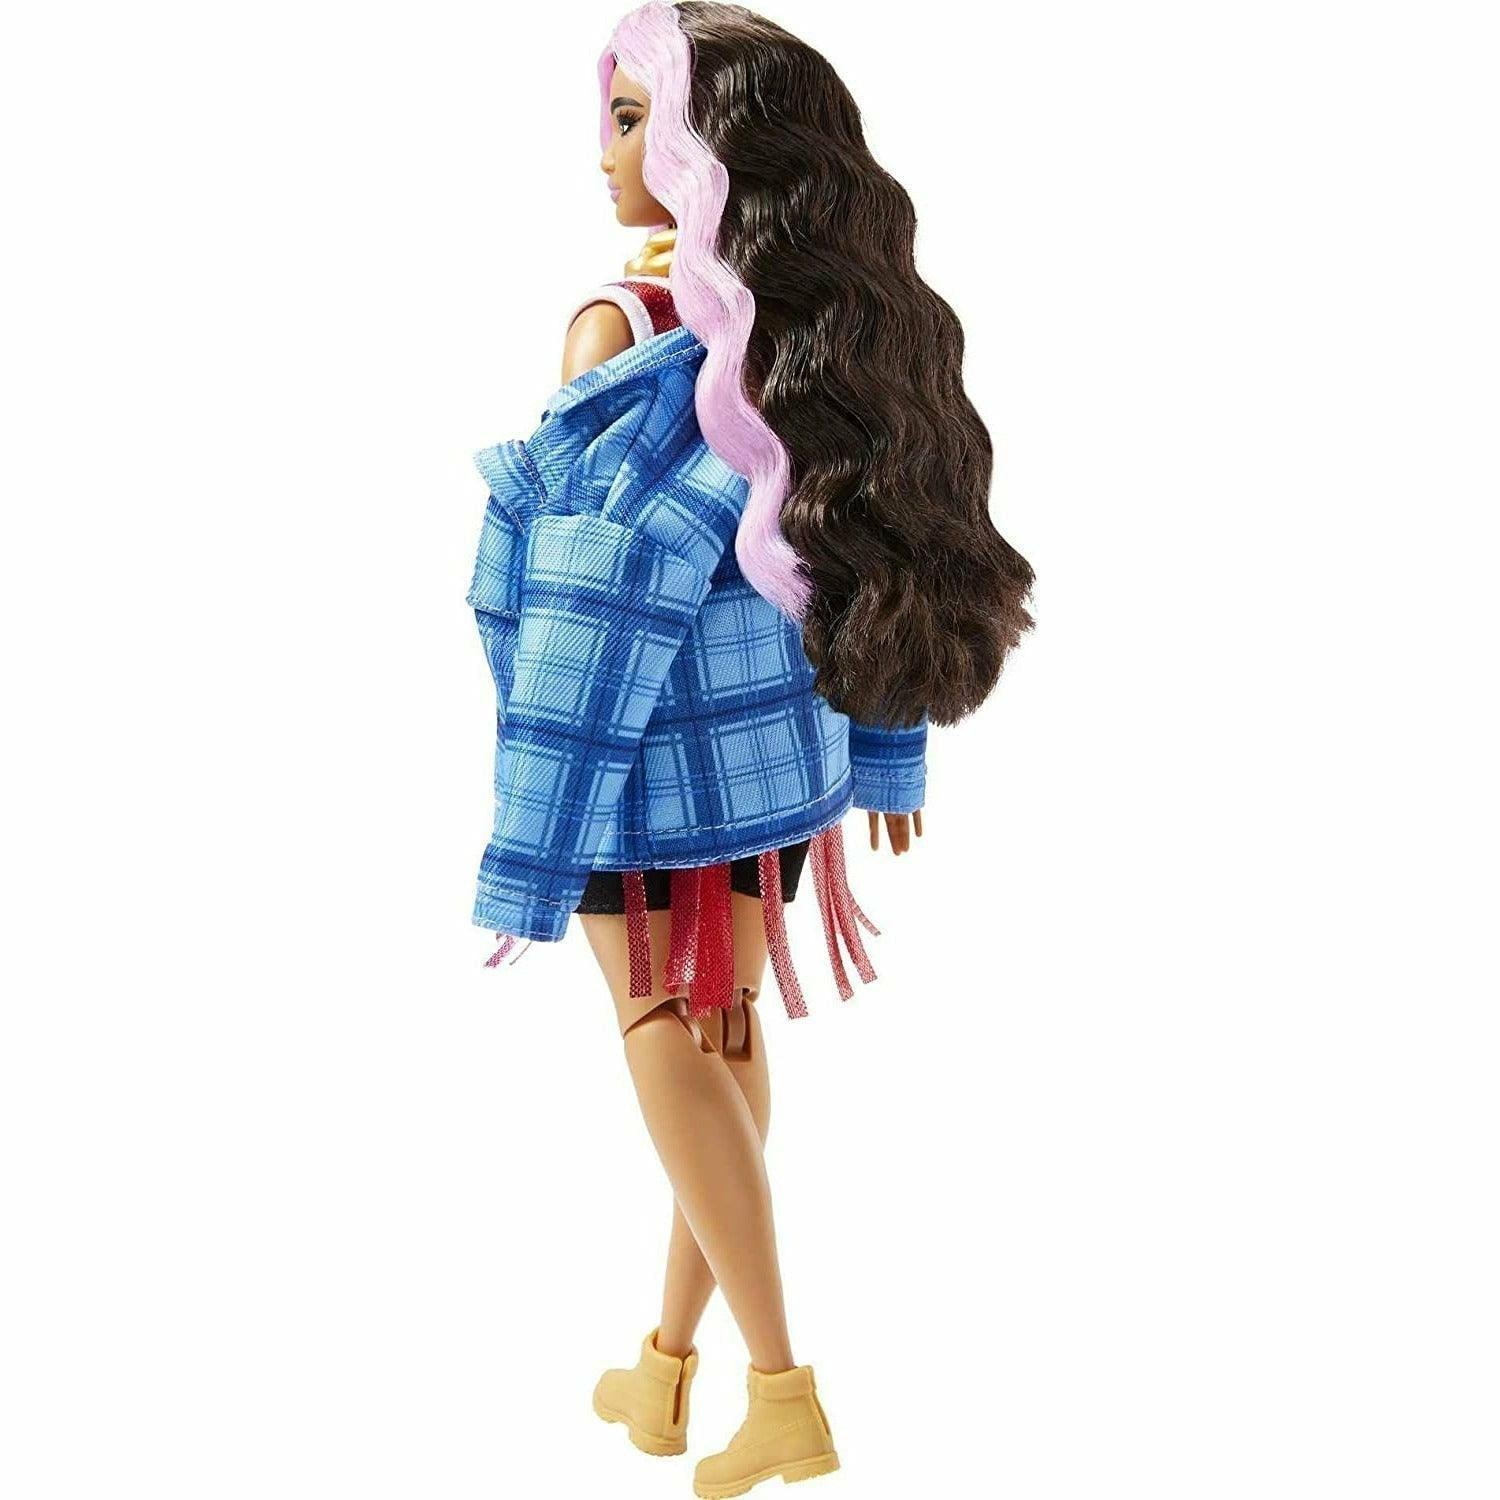 Barbie Extra Doll #13 in Basketball Jersey Dress & Accessories, with Pet Corgi, Extra-Long Crimped Hair with Pink Streaks - BumbleToys - 5-7 Years, Barbie, Dolls, Fashion Dolls & Accessories, Girls, OXE, Pre-Order